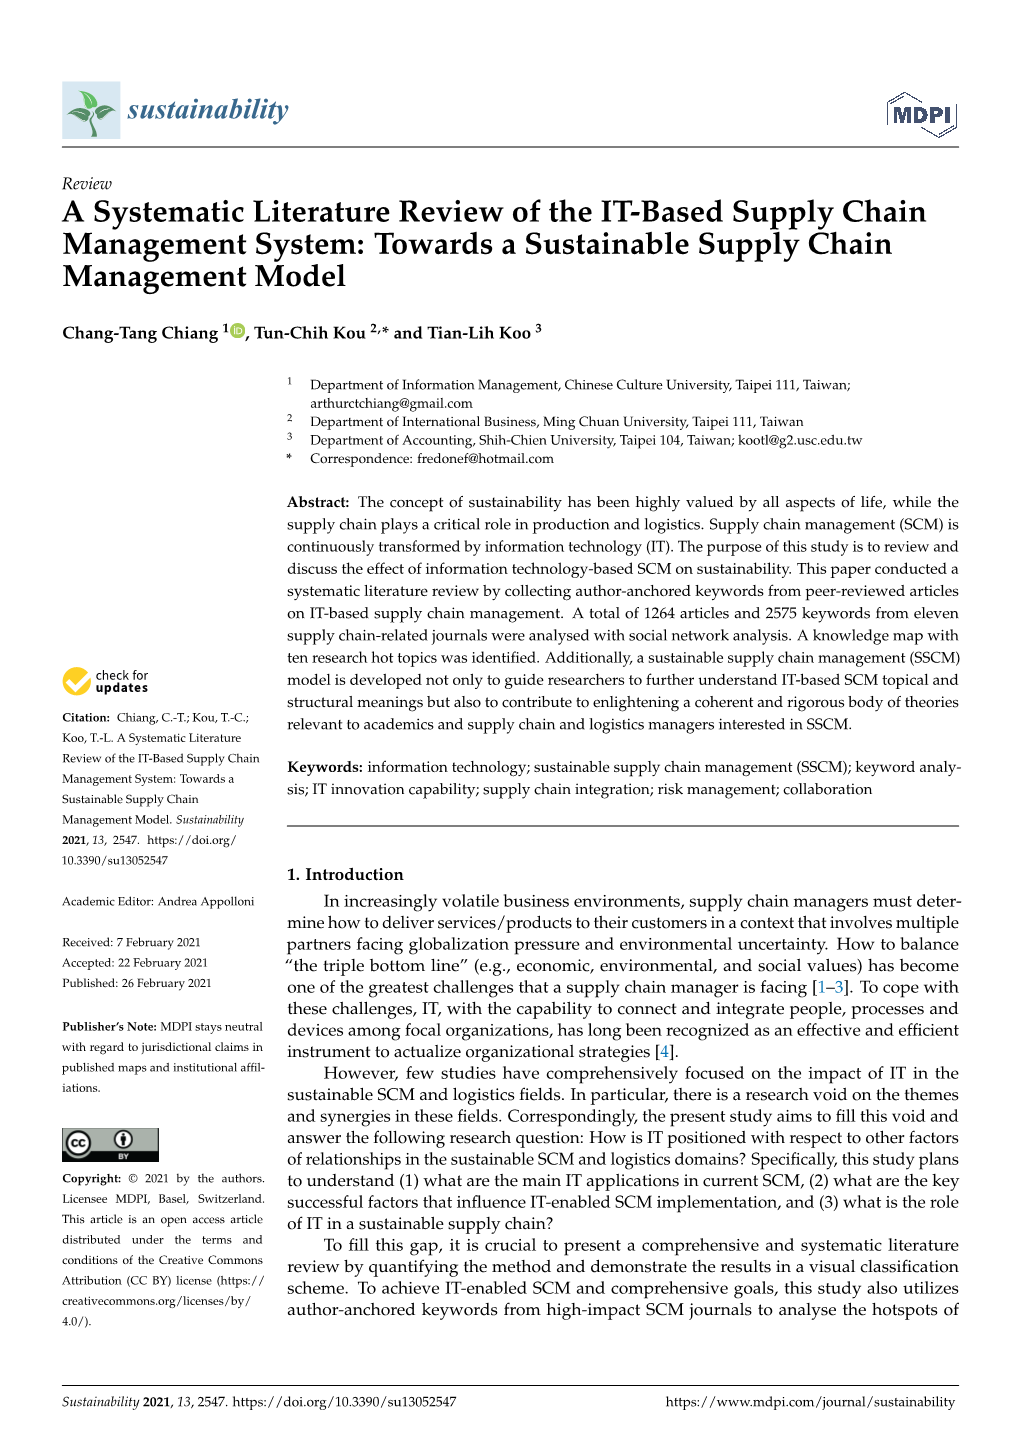 A Systematic Literature Review of the IT-Based Supply Chain Management System: Towards a Sustainable Supply Chain Management Model